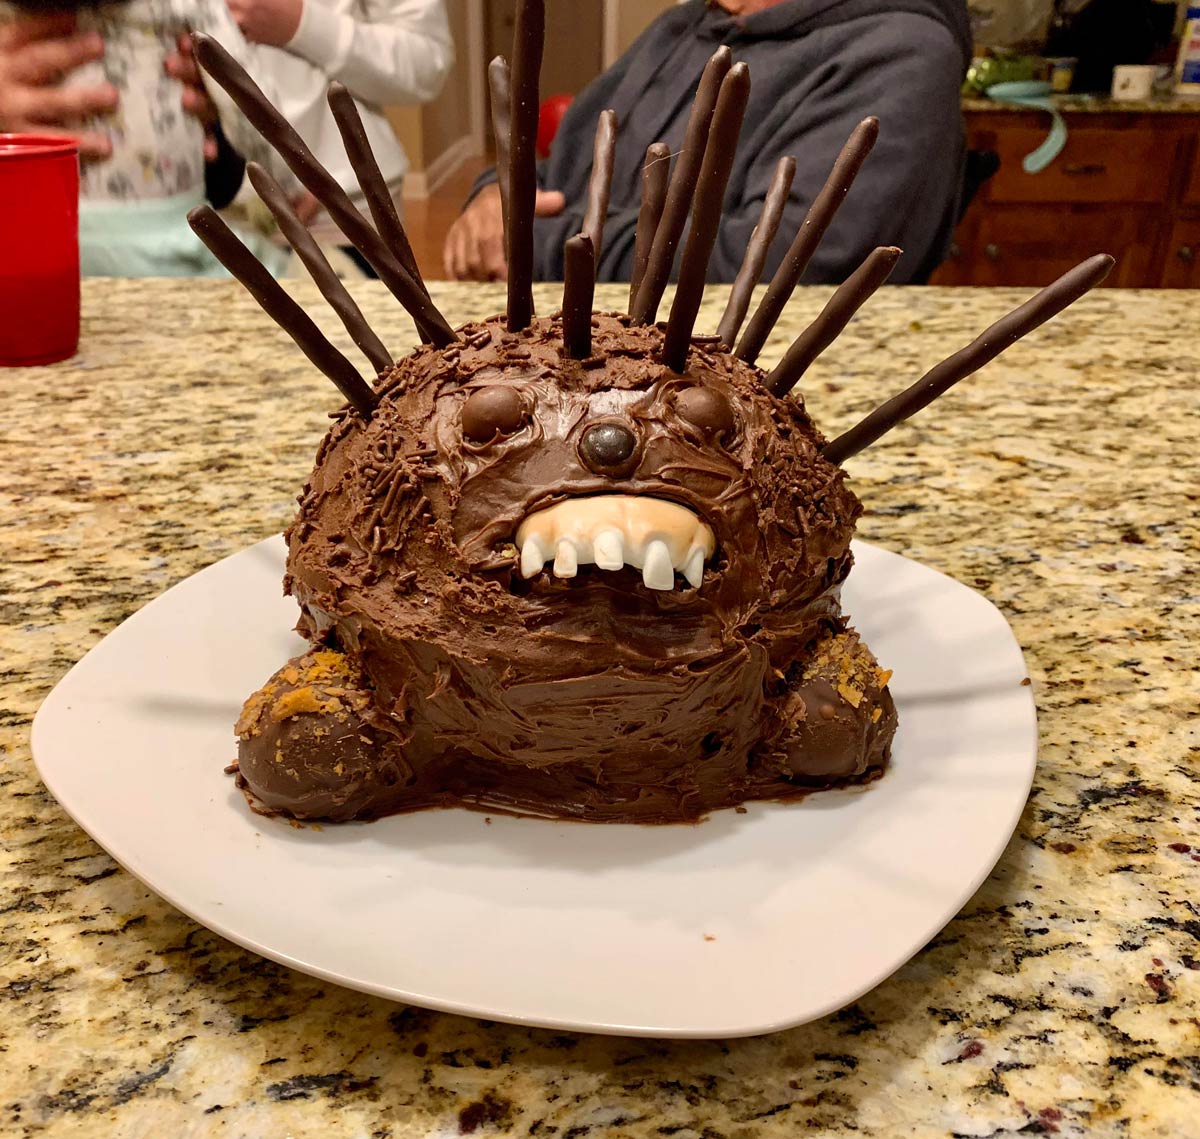 Made my husband the Eddie Murphy Sonic the Hedgehog SNL cake for his birthday. Thrilled with how hilariously awful it turned out